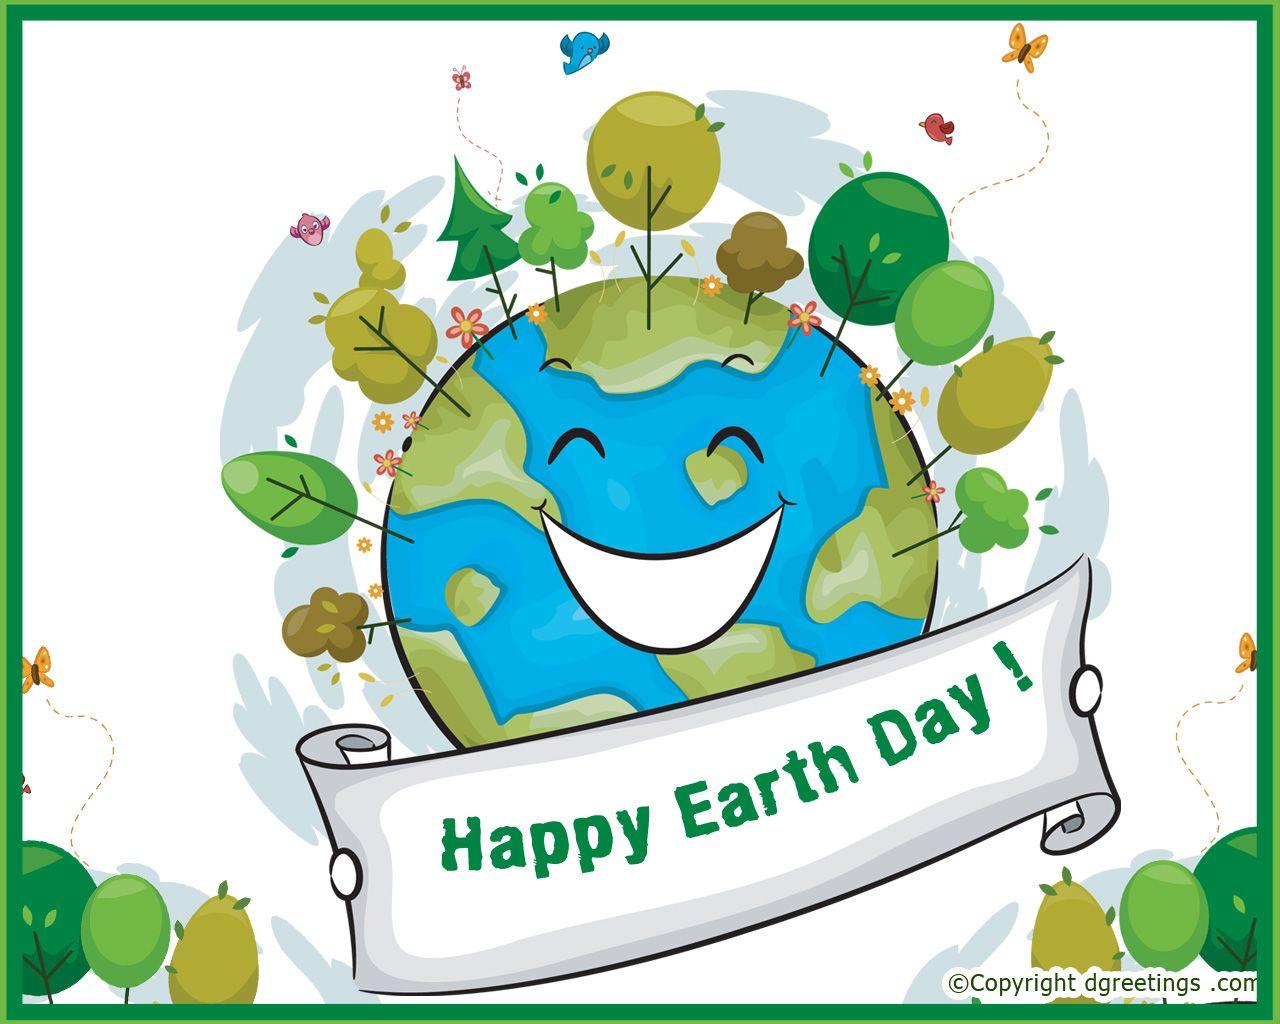 Earth’s Day Wallpapers, Free Earth’s Day wallpapers, Wallpapers